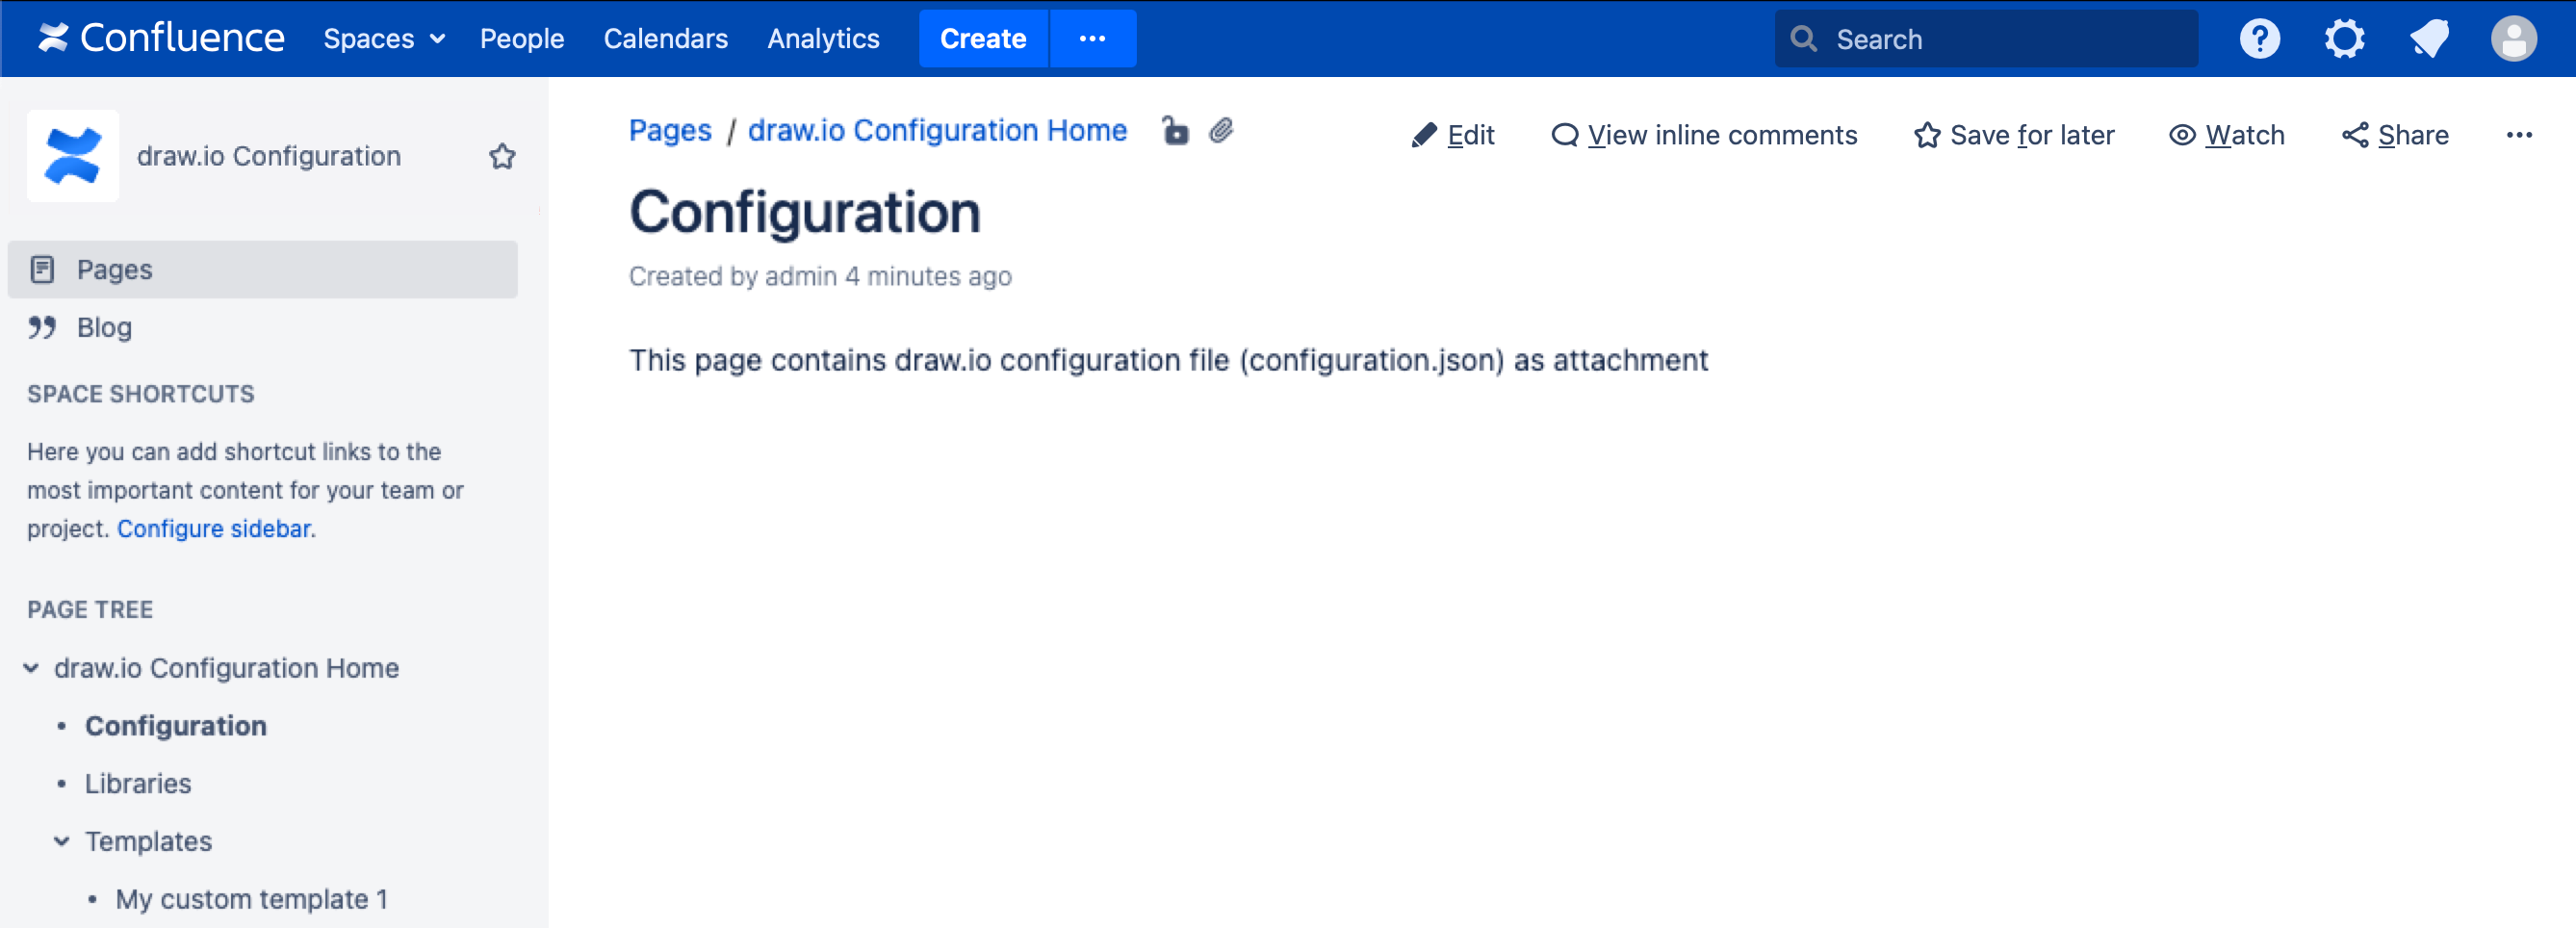 A new space will be created in your Data Center / Server instance with the pages needed for draw.io configuration in Cloud.